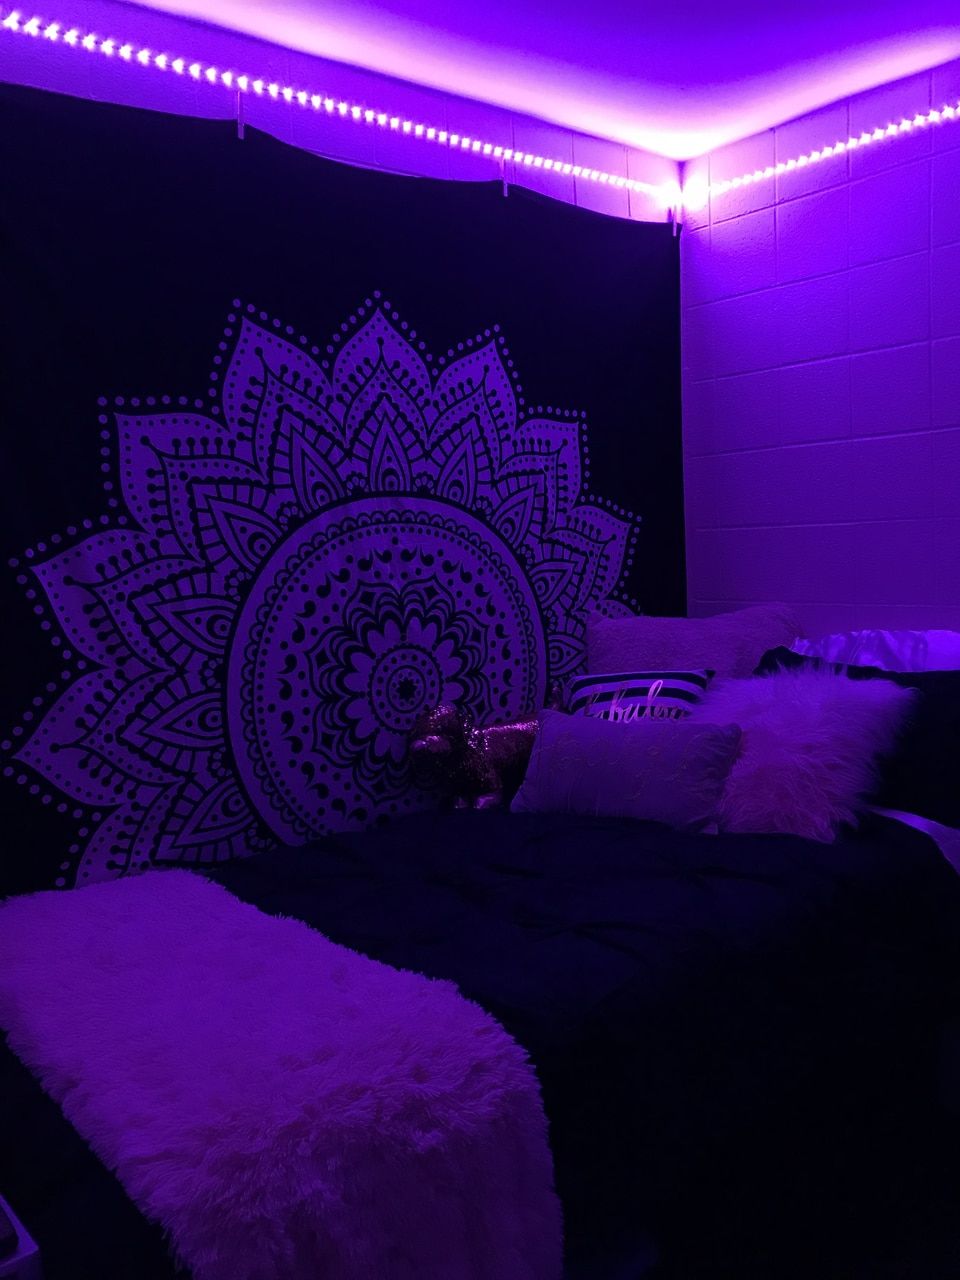 My college dorm ✨ shared by Bri †